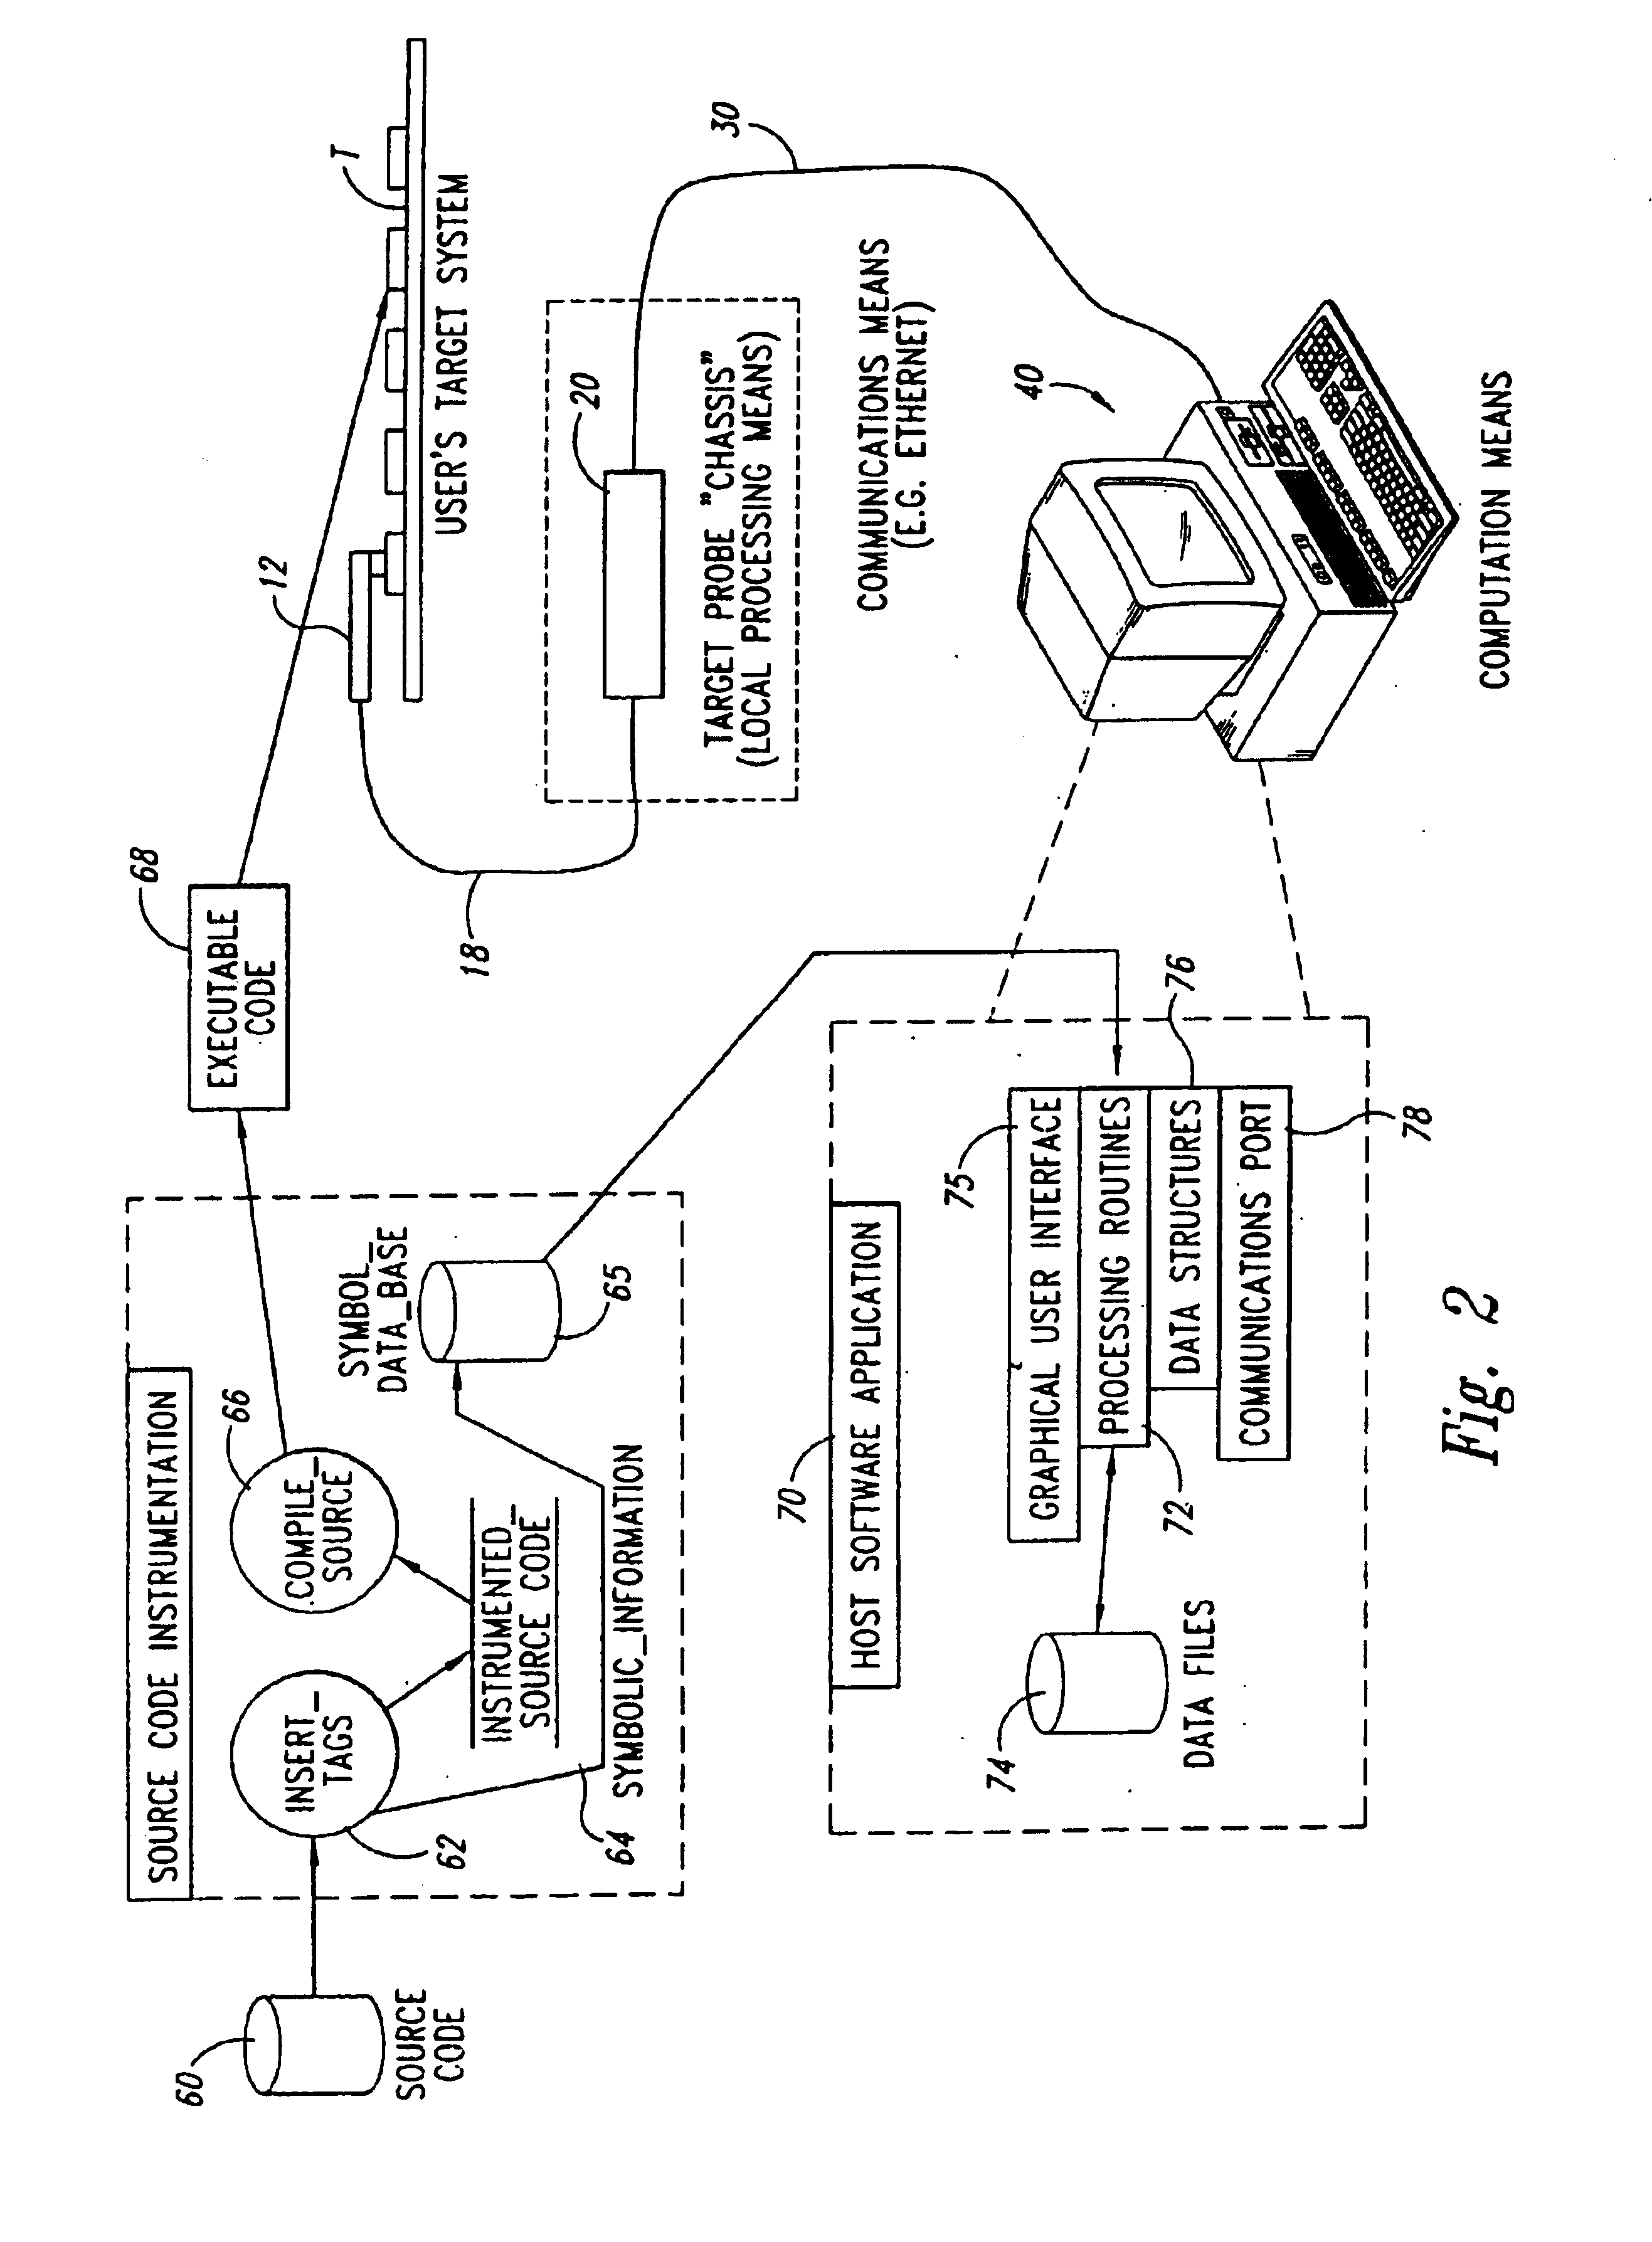 Software analysis system having an apparatus for selectively collecting analysis data from a target system executing software instrumented with tag statements and method for use thereof